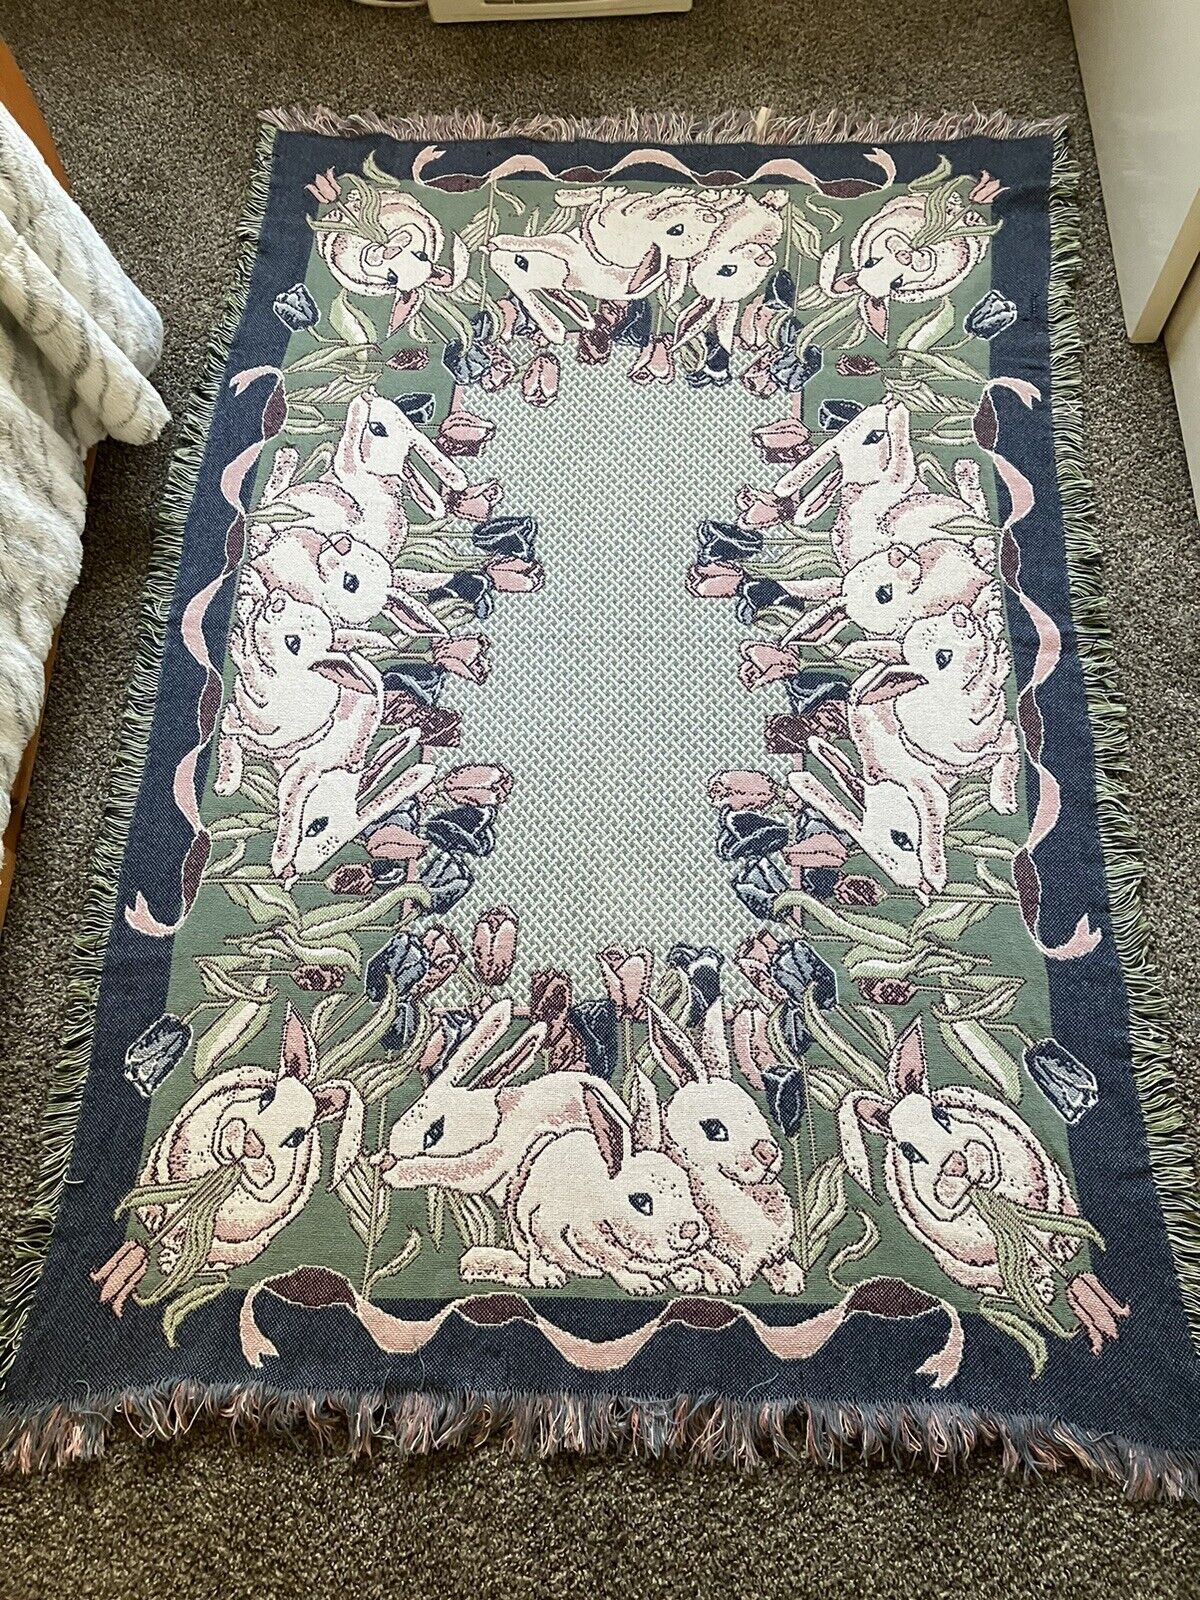 1992 MWW Easter Bunny Rabbits Foam Green Floral Tapestry Cotton Throw Blanket